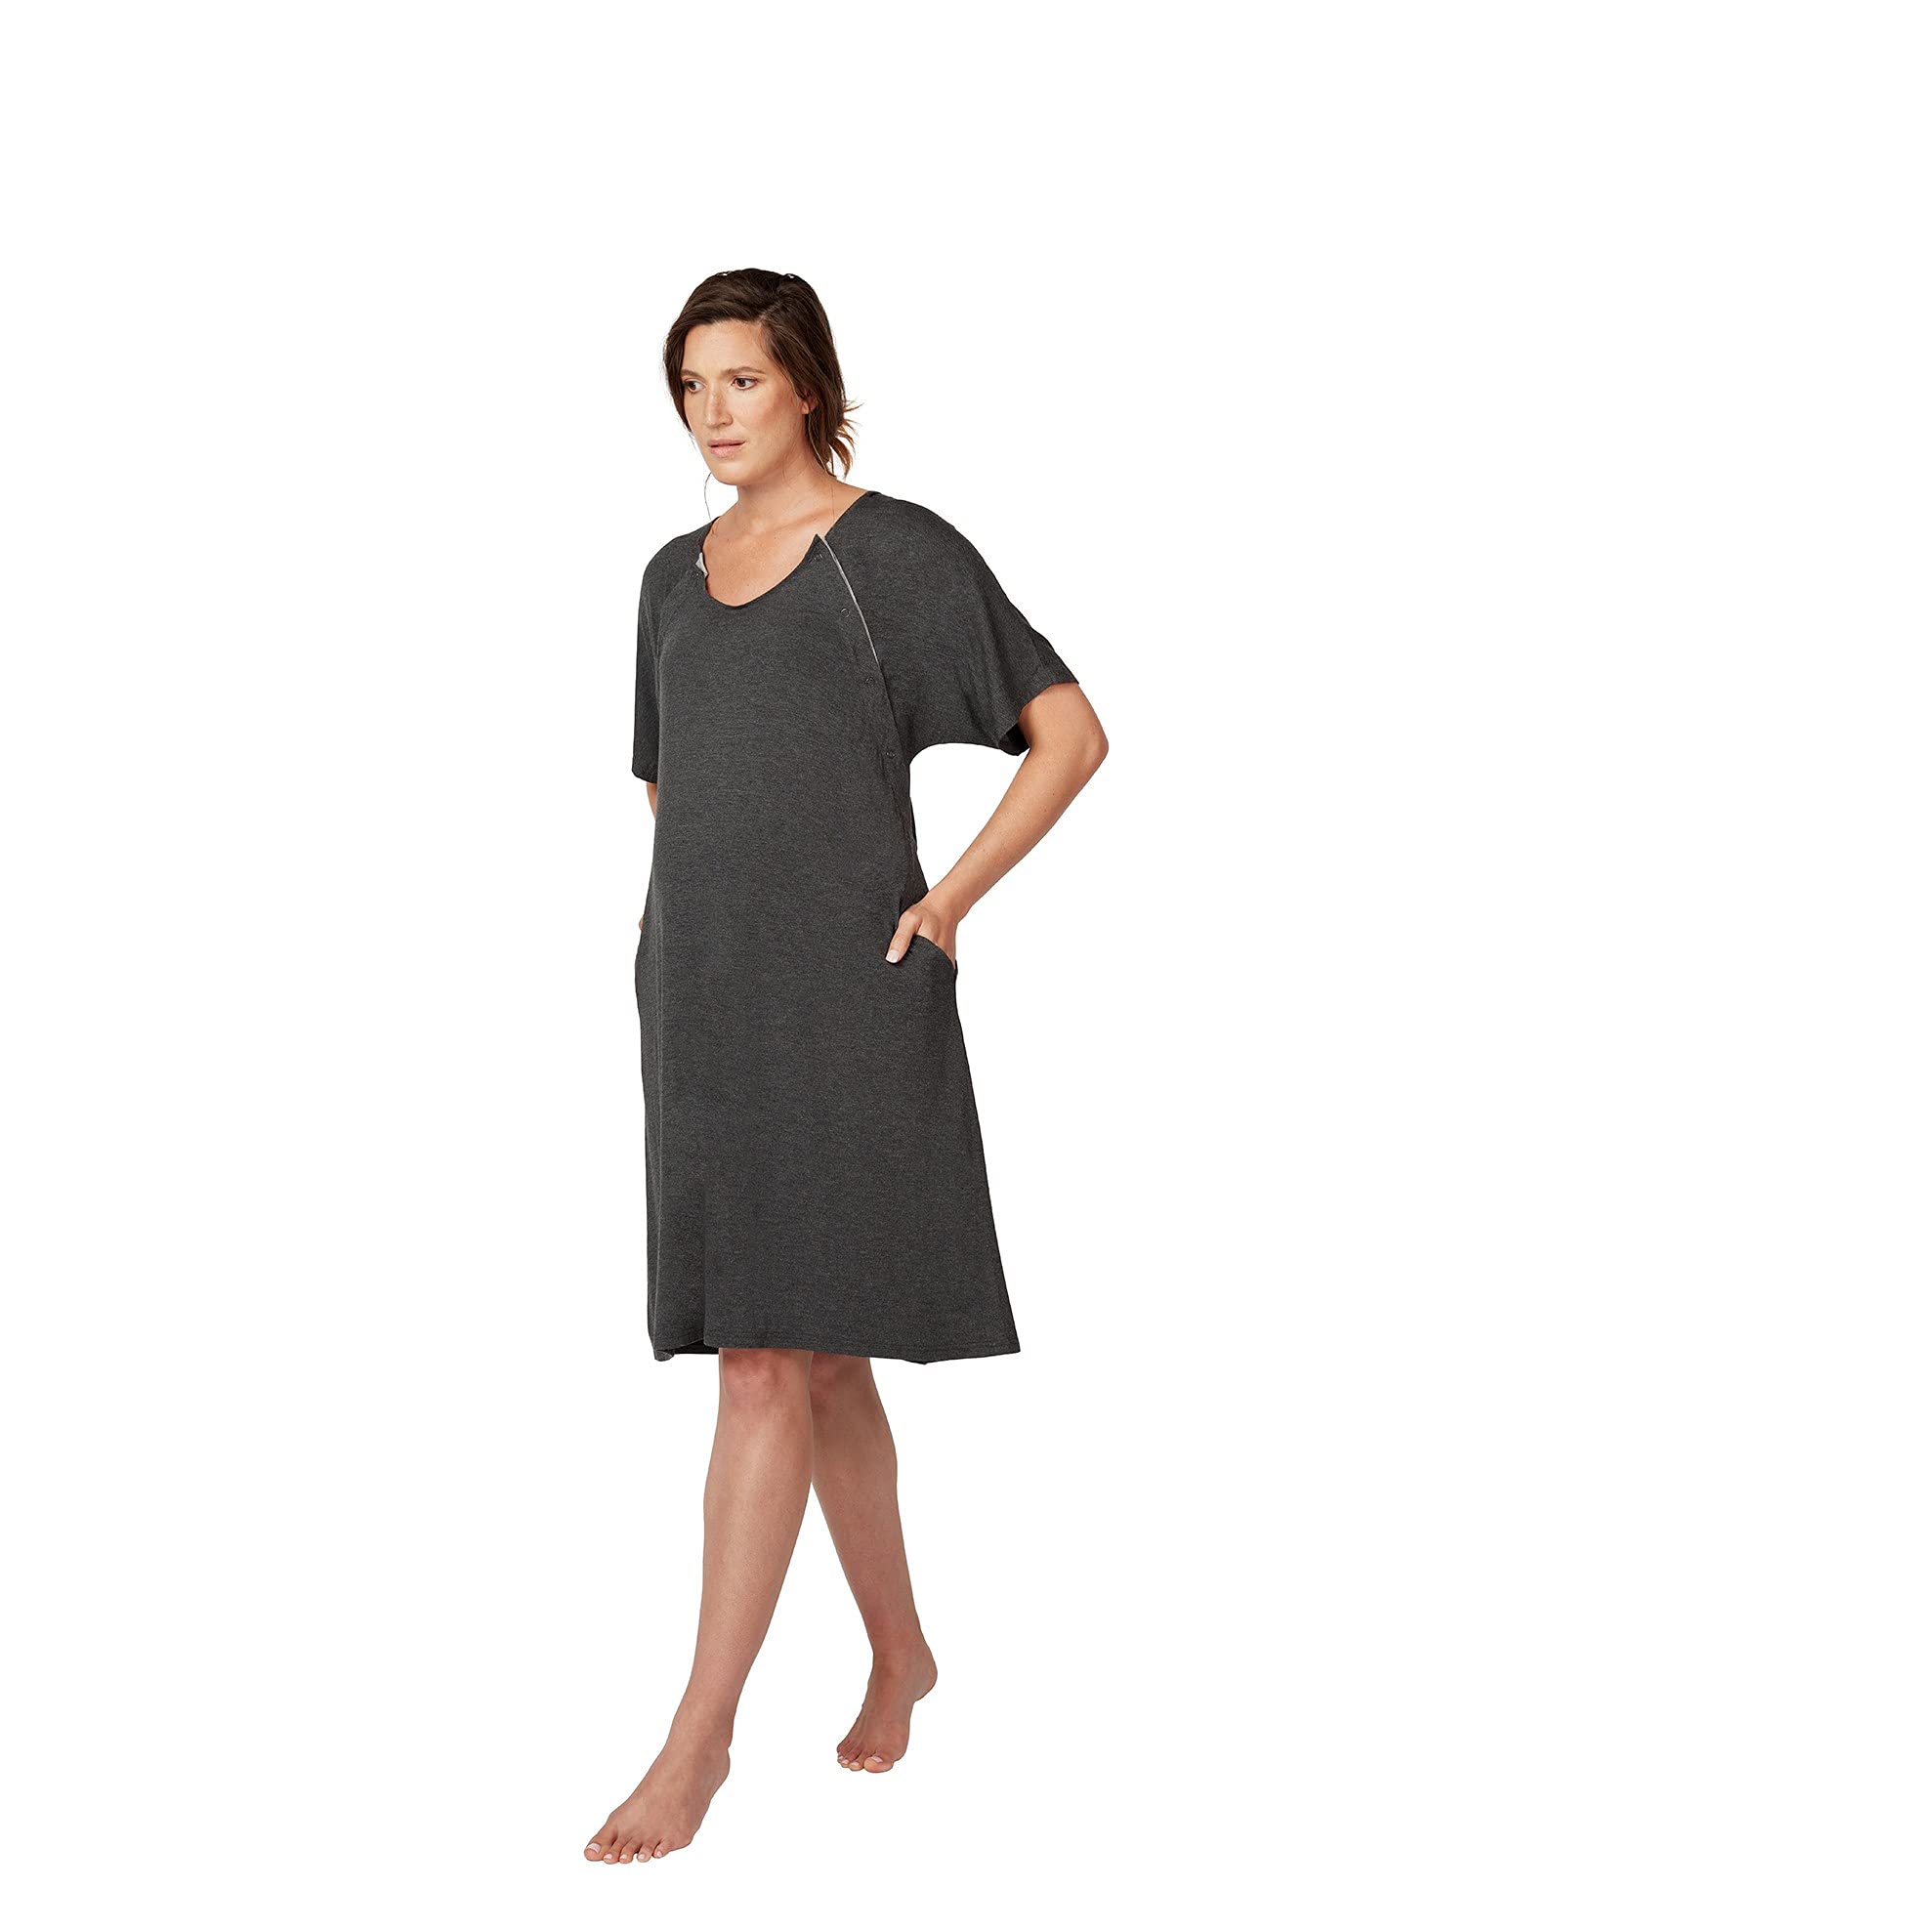 Frida Mom Delivery and Nursing Gown | Easy-Snap, Tagless, Skin-to-Skin Access and Full Coverage in The Back